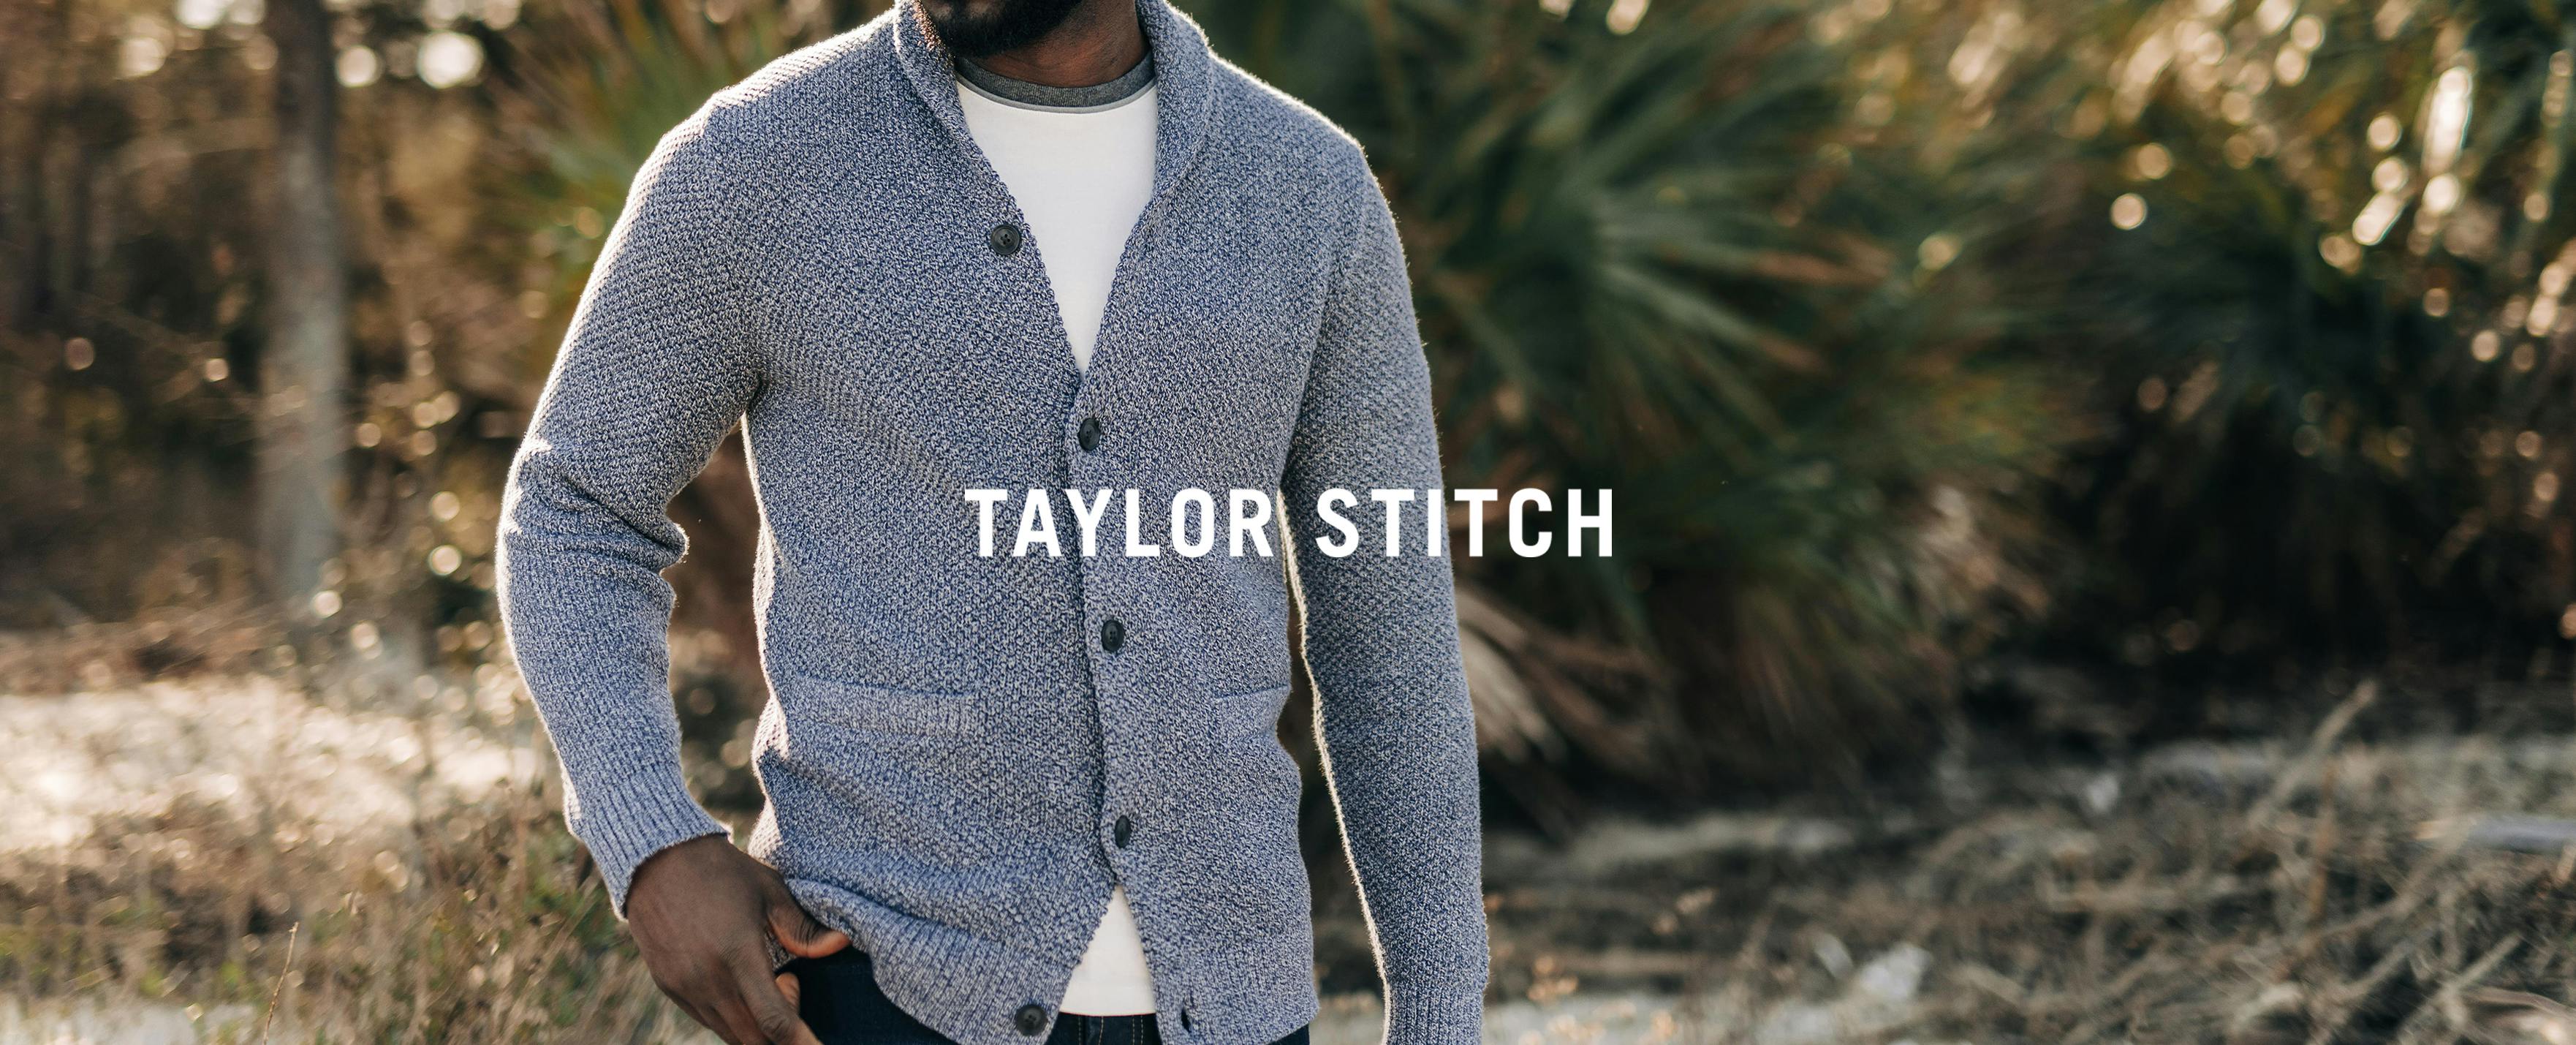 Taylor Stitch logo over image of man in sweater